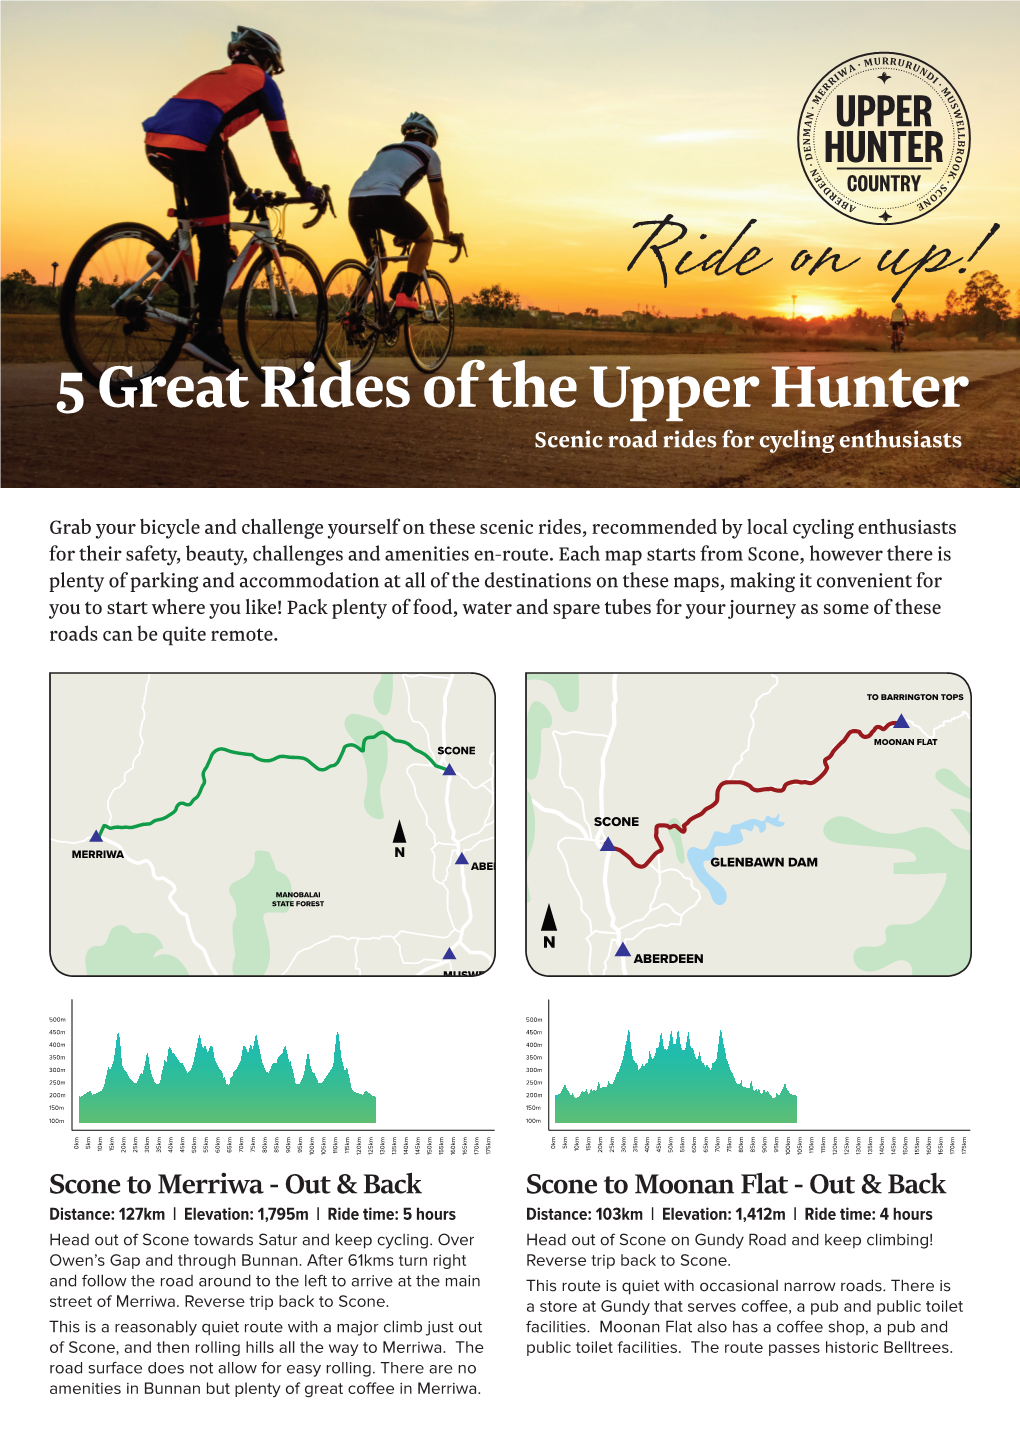 5 Great Rides of the Upper Hunter Scenic Road Rides for Cycling Enthusiasts